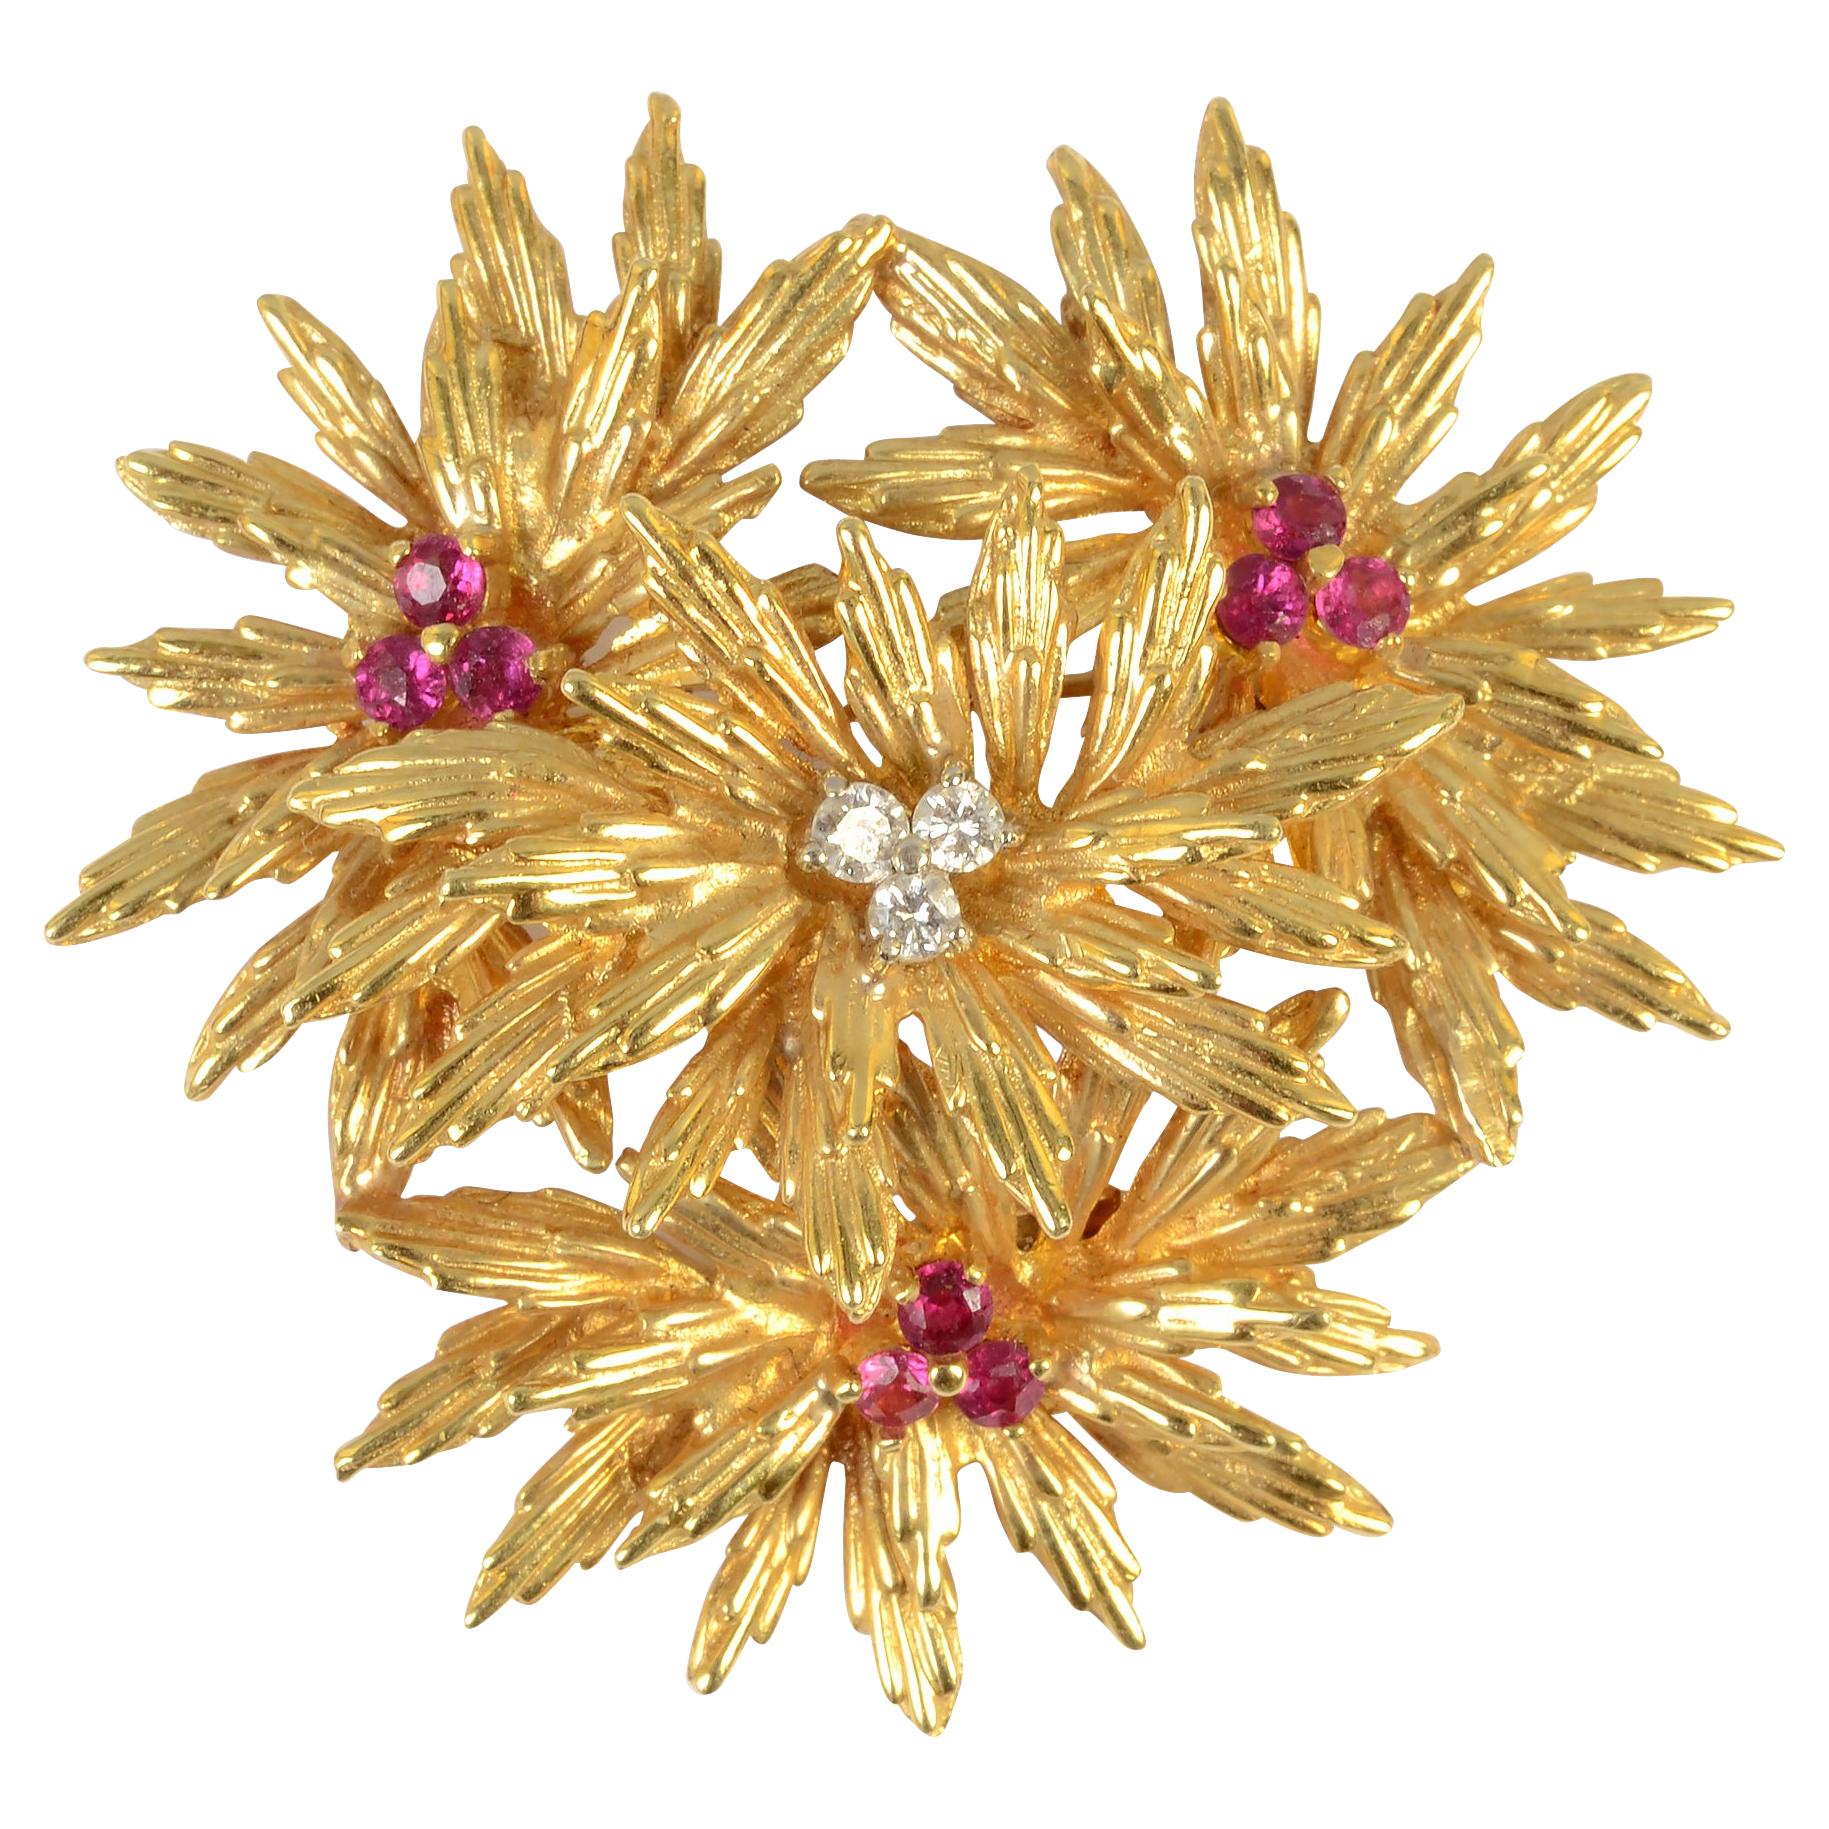 Tiffany Gold Floral Brooch with Rubies and Diamonds